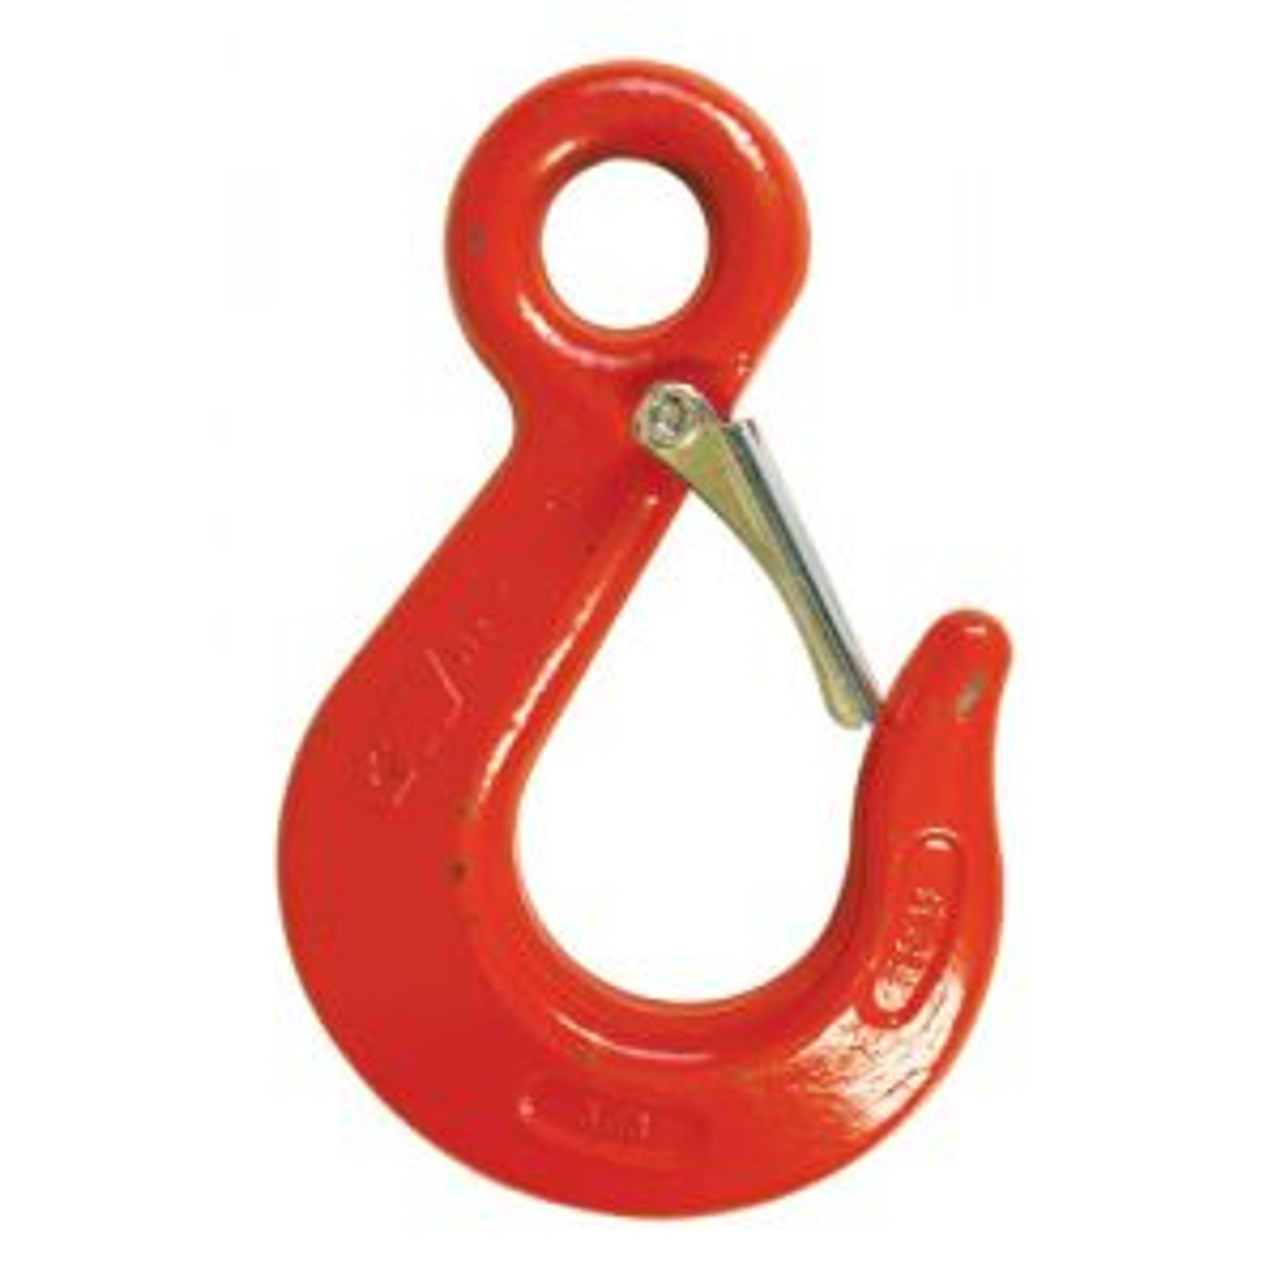 4.5 Ton Alloy Eye Hoist Hook With Latch, Made In USA.